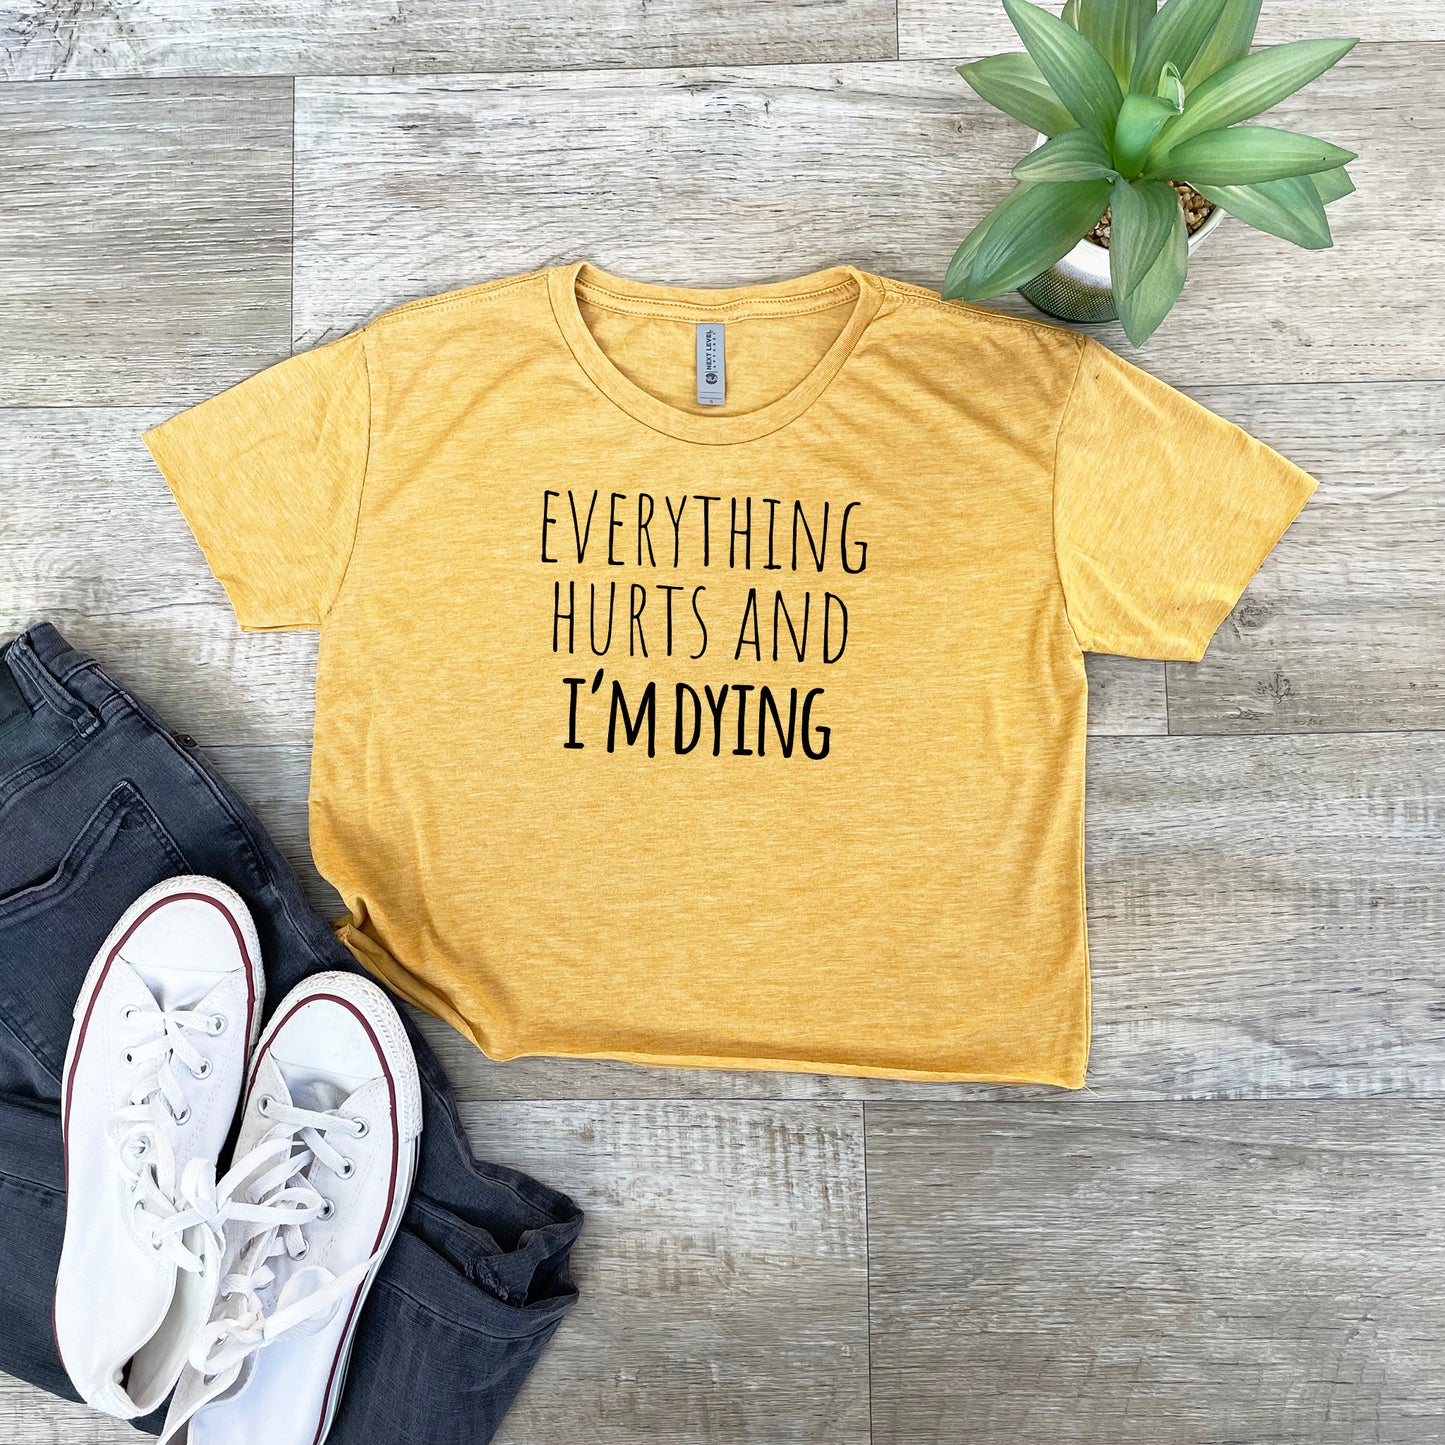 Everything Hurts and I'm Dying - Women's Crop Tee - Heather Gray or Gold